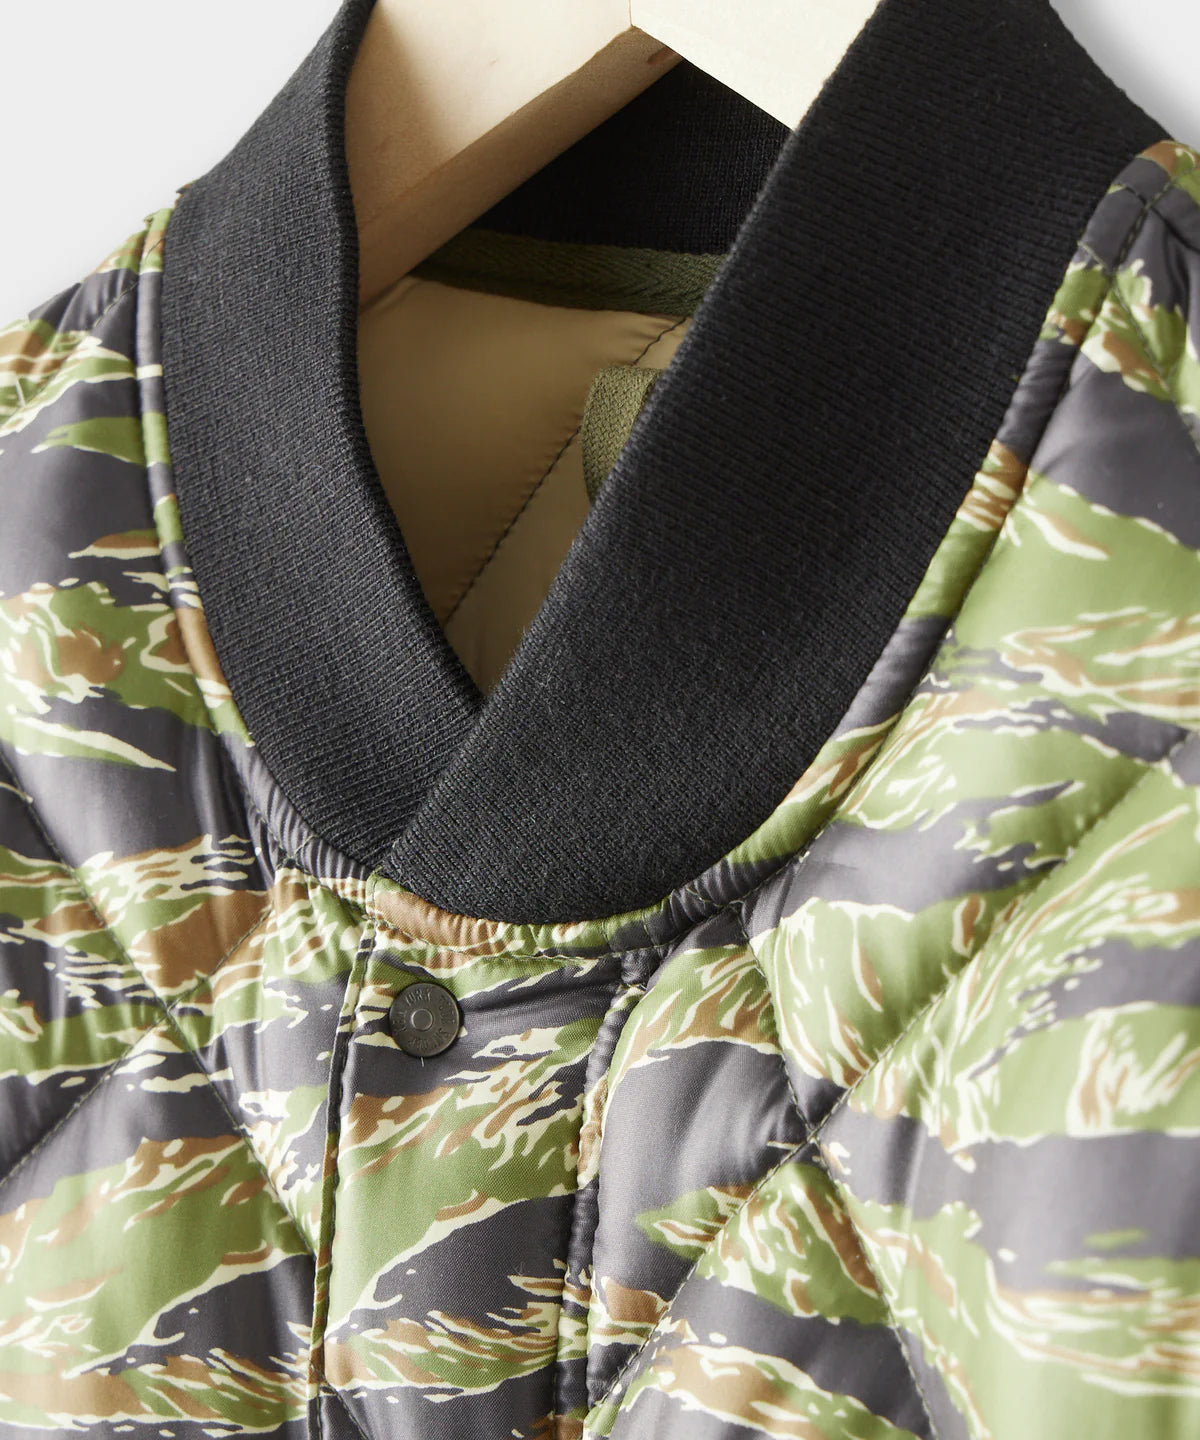 TODD SNYDER JAPANESE QUILTED DOWN SNAP BOMBER JACKET IN TIGER CAMO